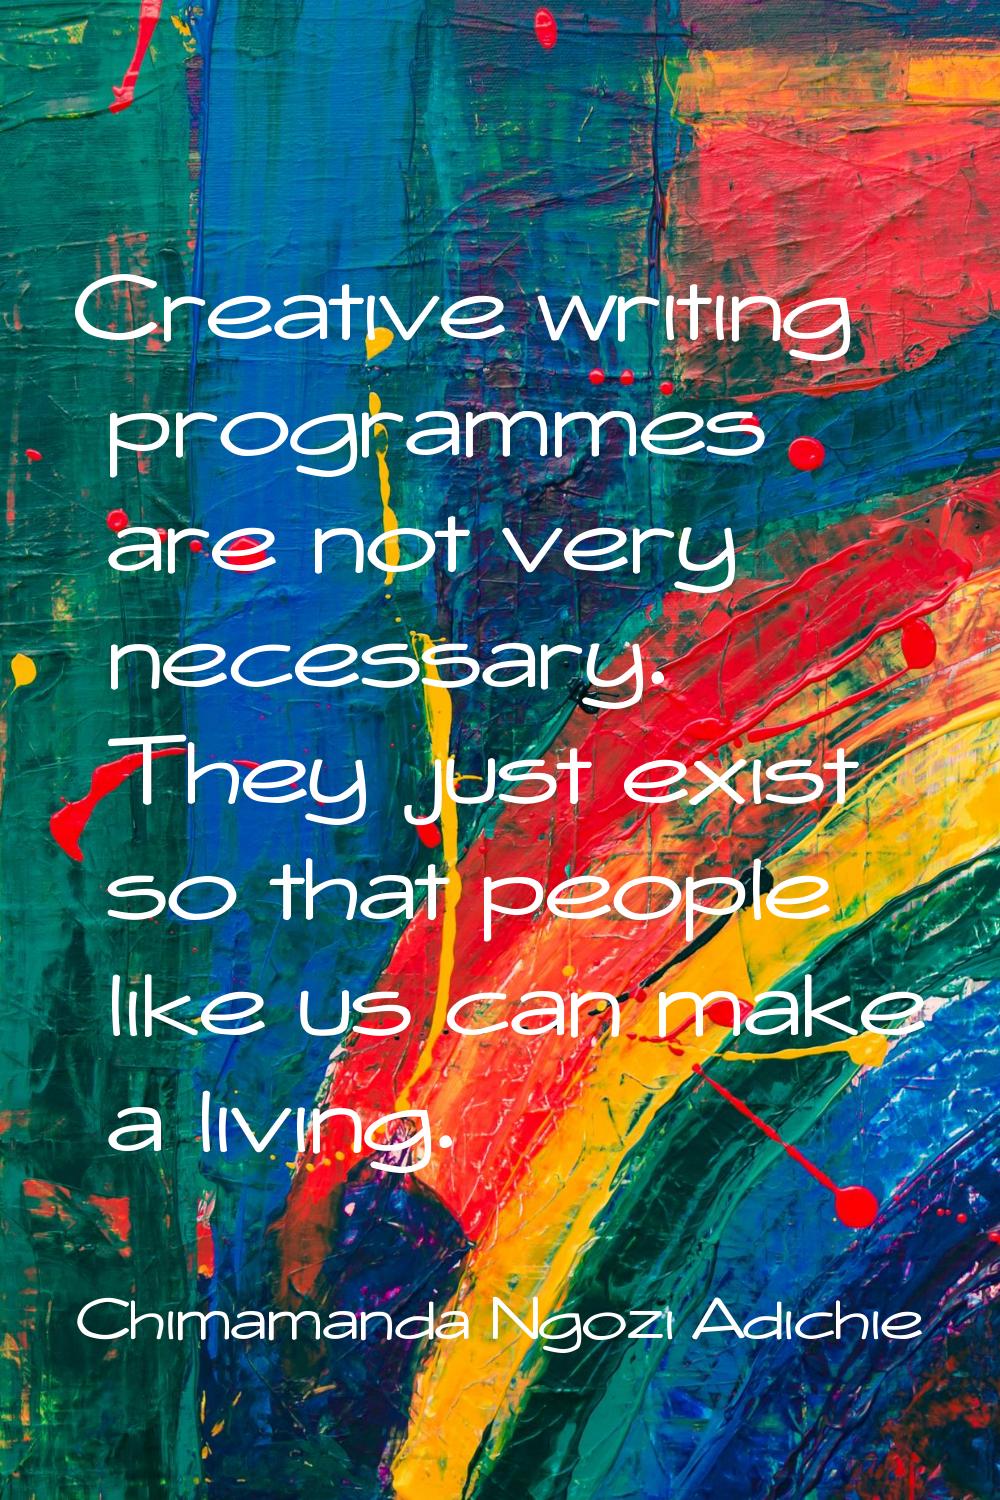 Creative writing programmes are not very necessary. They just exist so that people like us can make